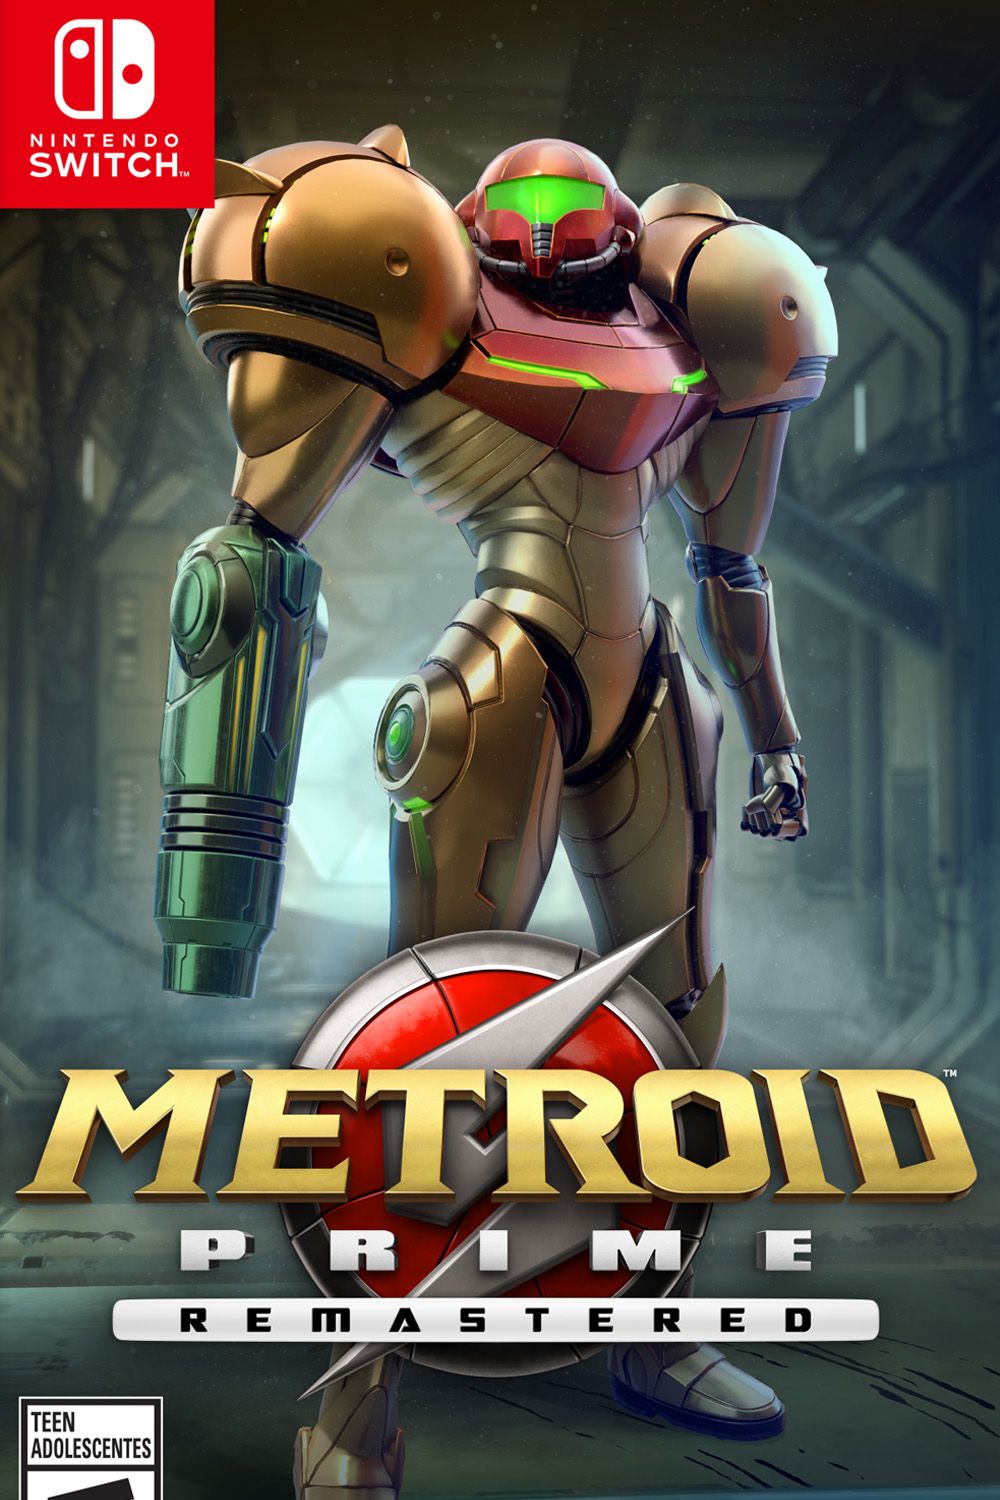 metroid-prime-remastered-game-rant